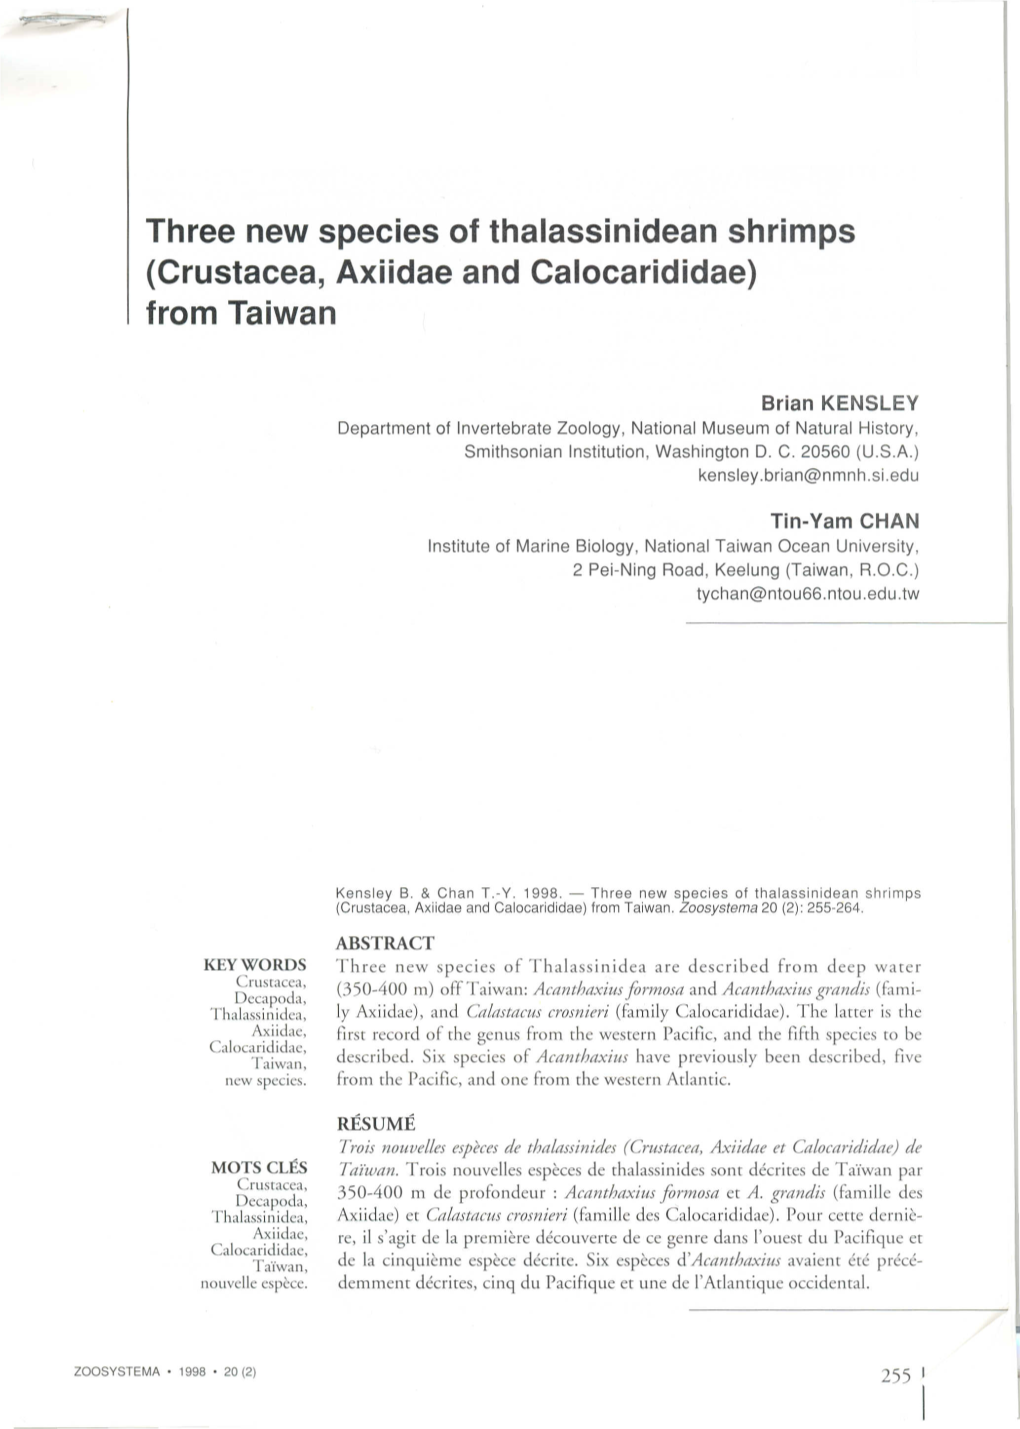 Three New Species of Thalassinidean Shrimps (Crustacea, Axiidae and Calocarididae) from Taiwan